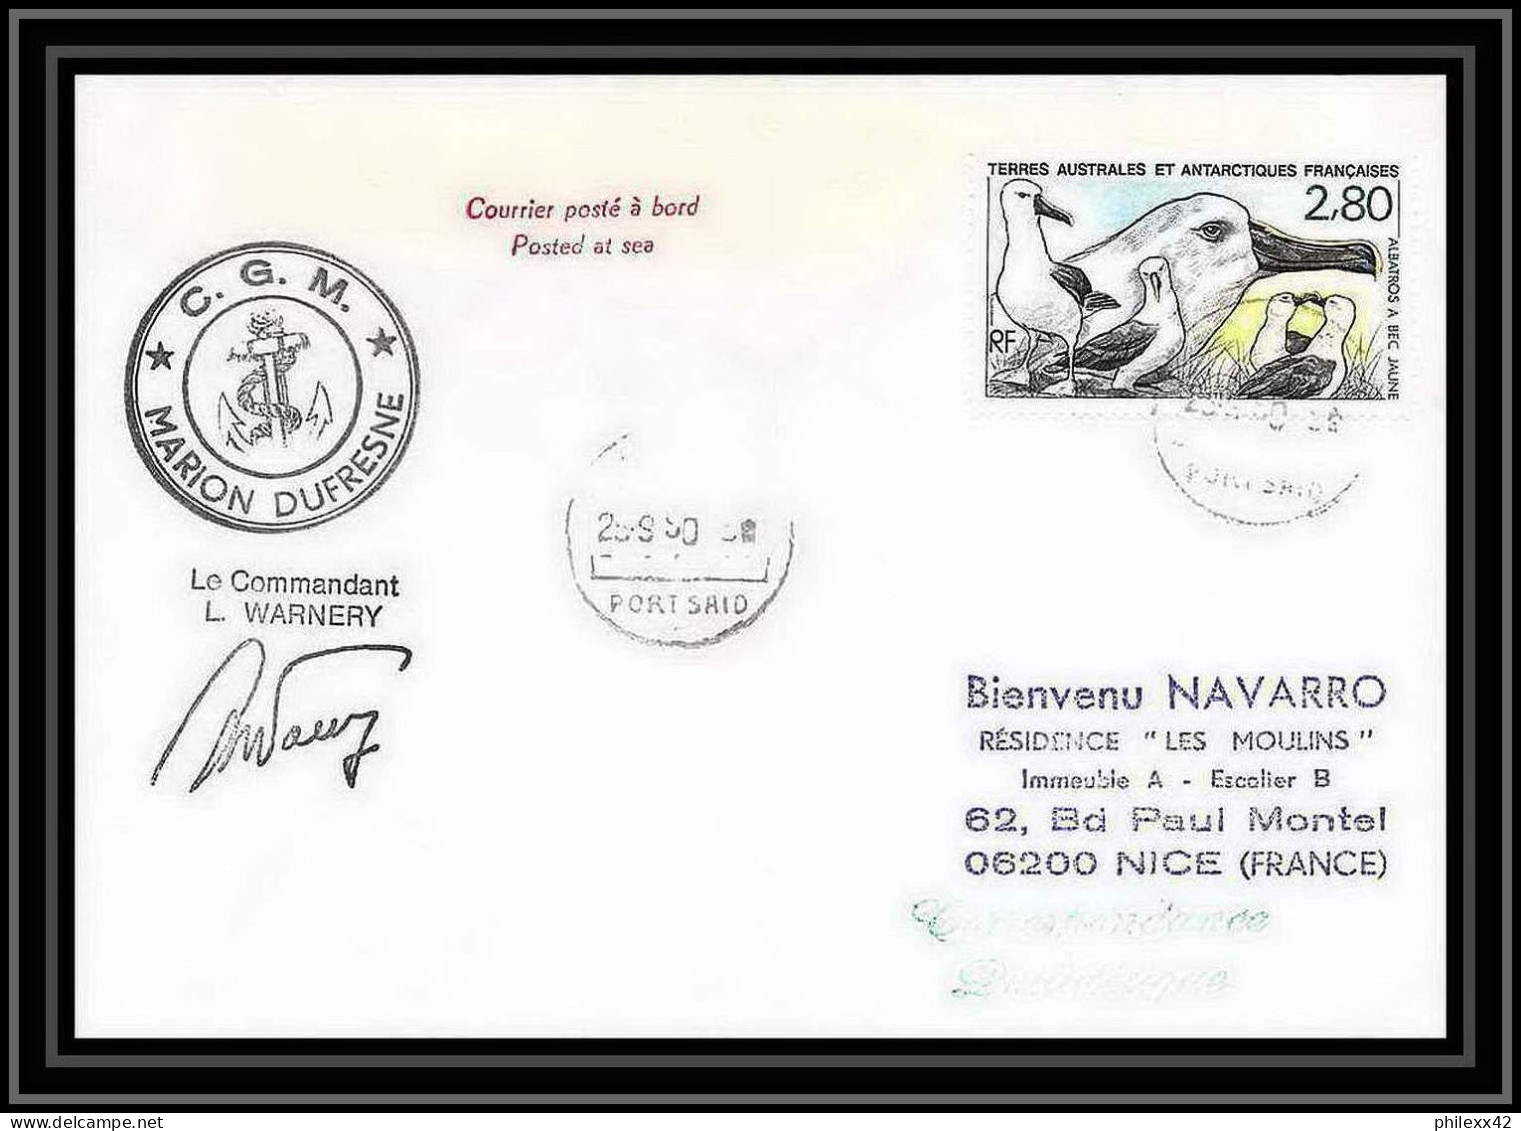 1655 Marion Dufresne 28/8/1990 Port Said Signé Signed Warnery TAAF Antarctic Terres Australes Lettre (cover) - Covers & Documents